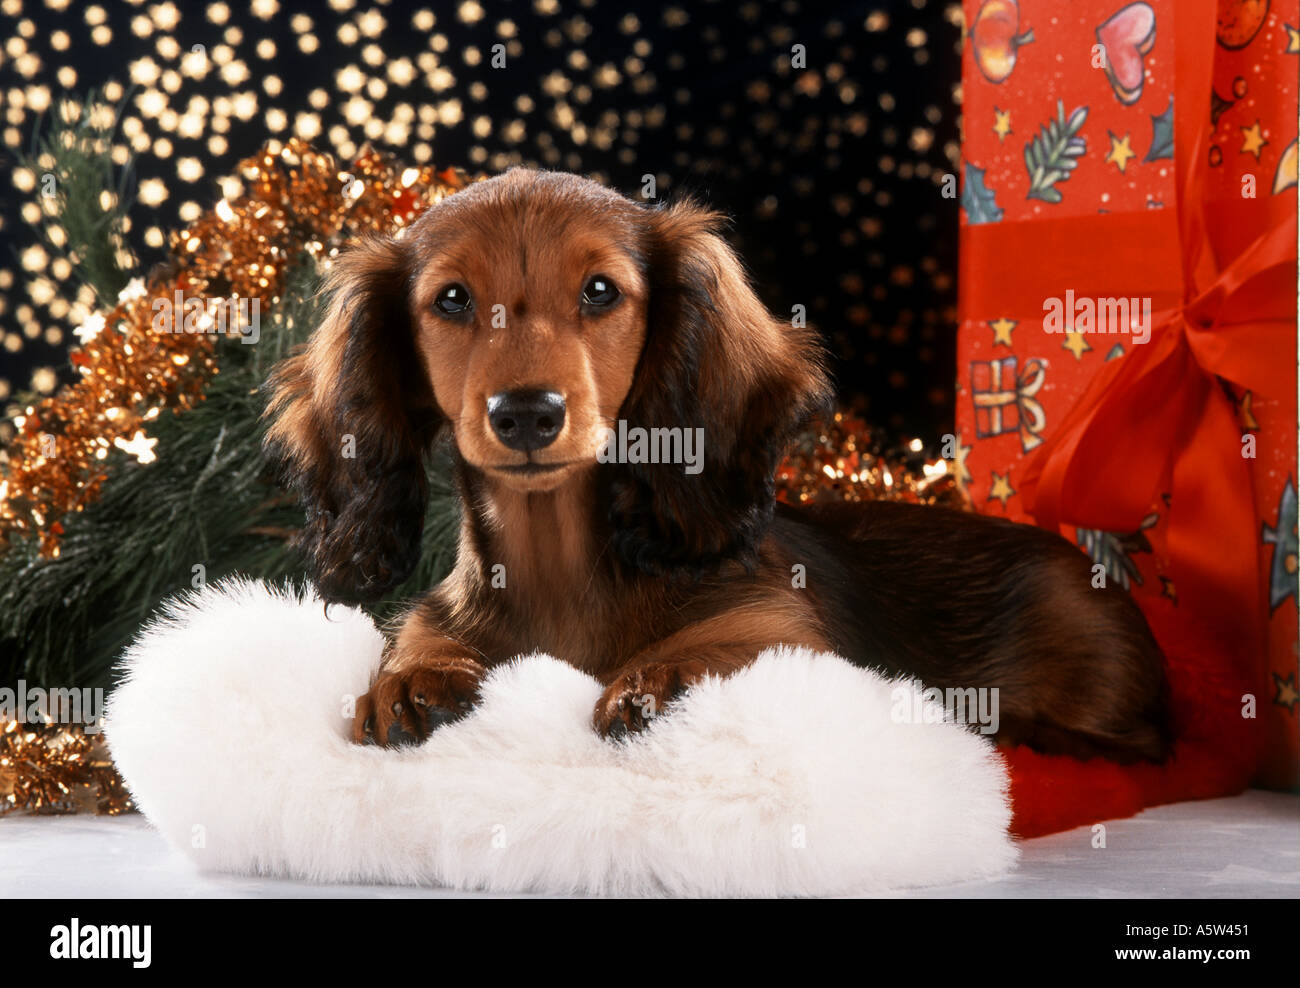 christmas : long-haired dachshund dog next to present Stock Photo